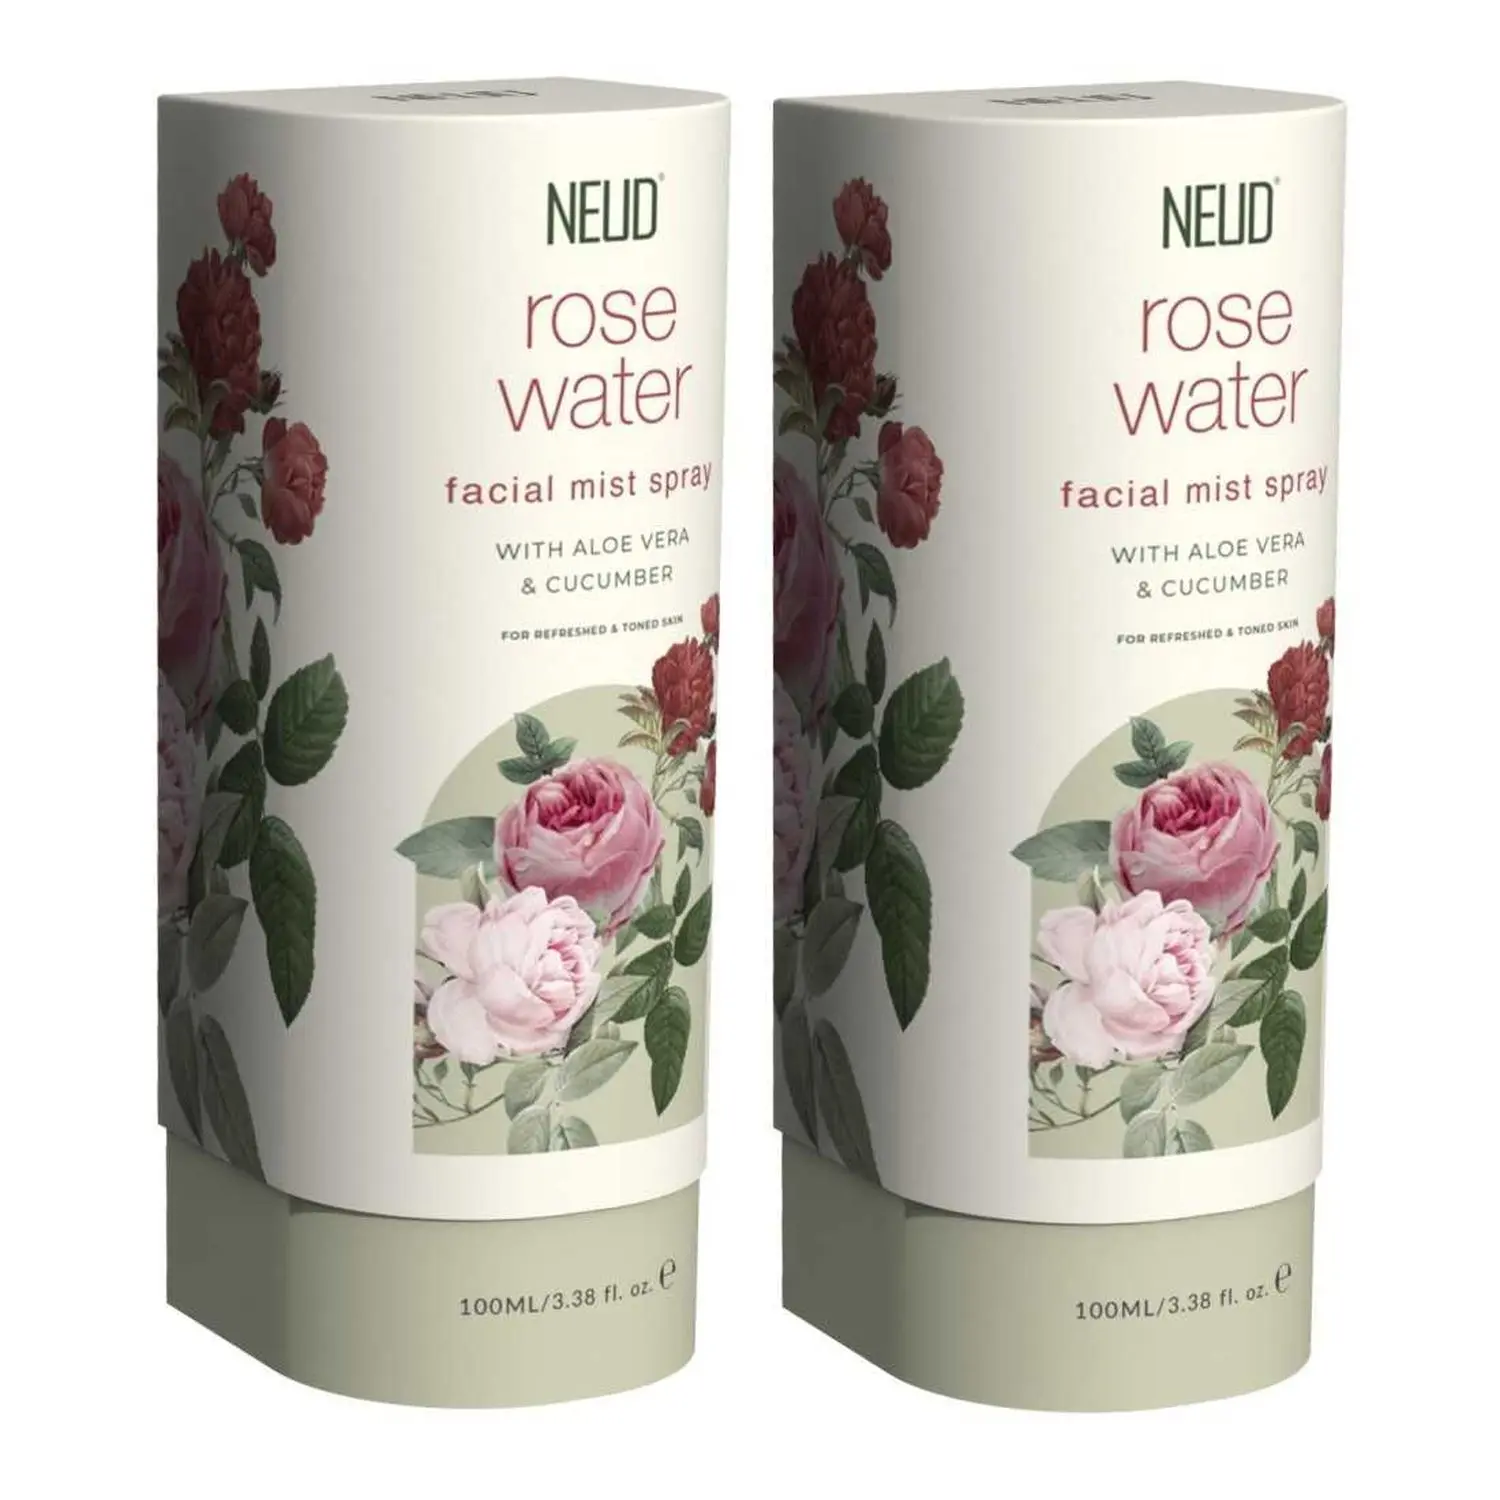 NEUD Rose Water Facial Mist Spray for Refreshed and Toned Skin - 2 Packs (100 ml Each)